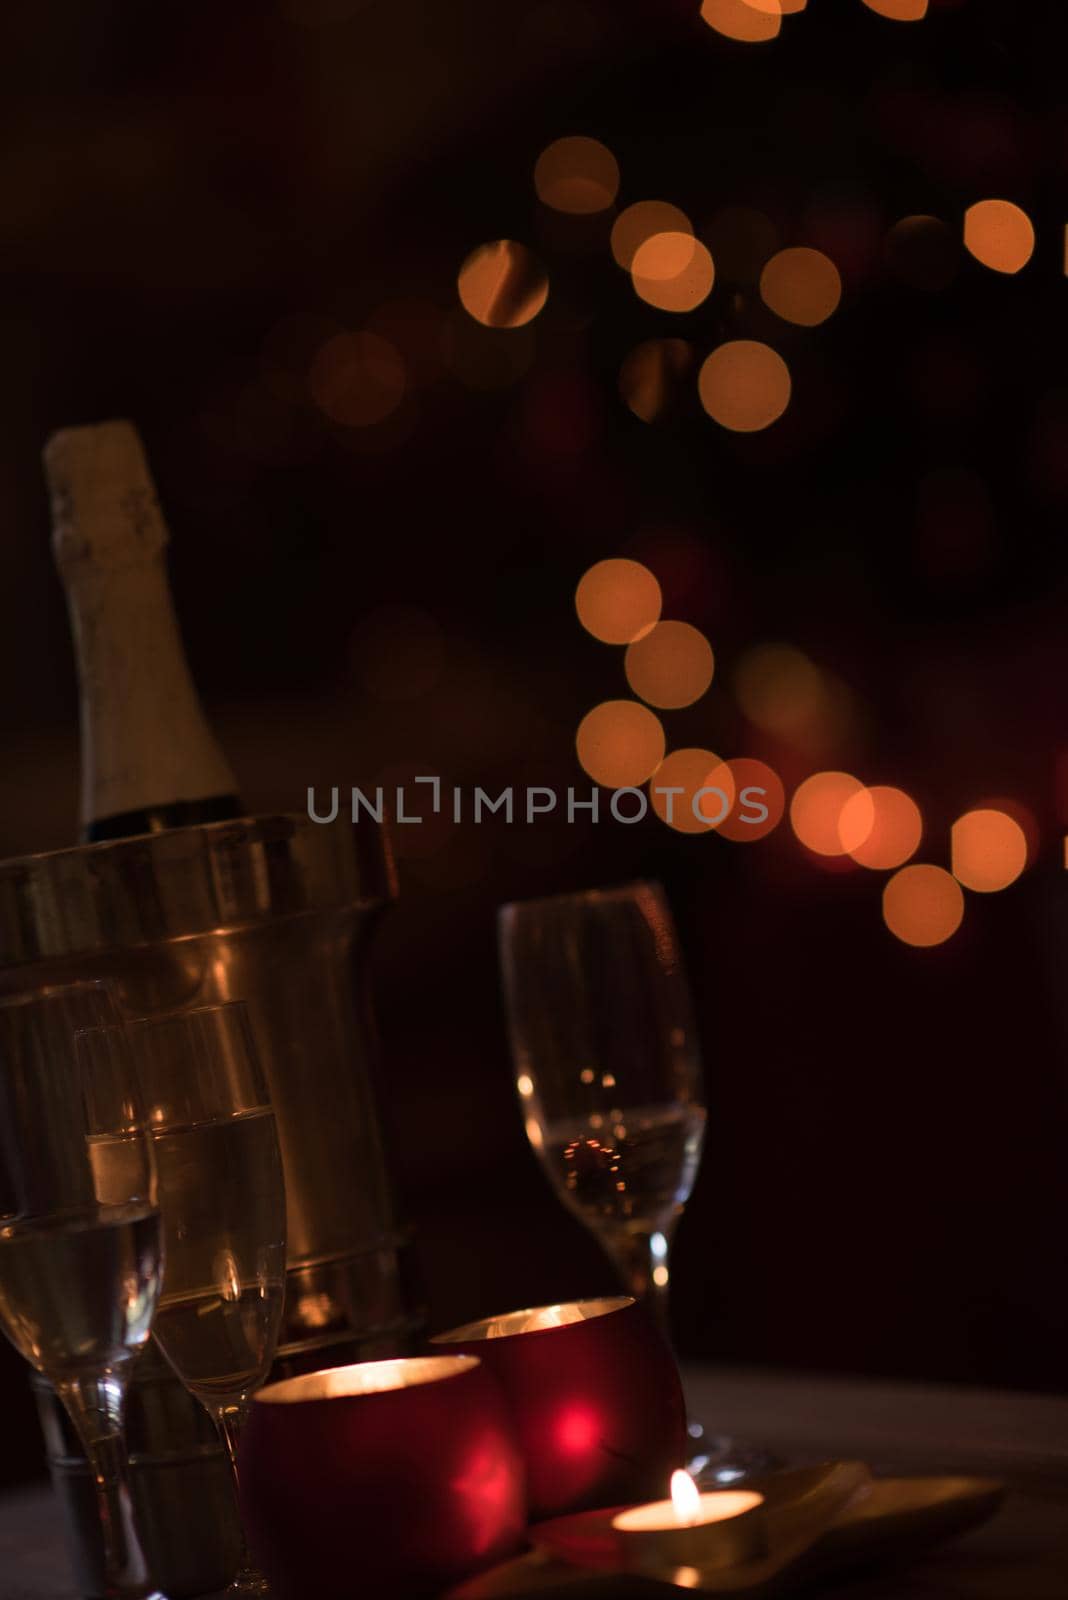 champagne on a wooden table by dotshock